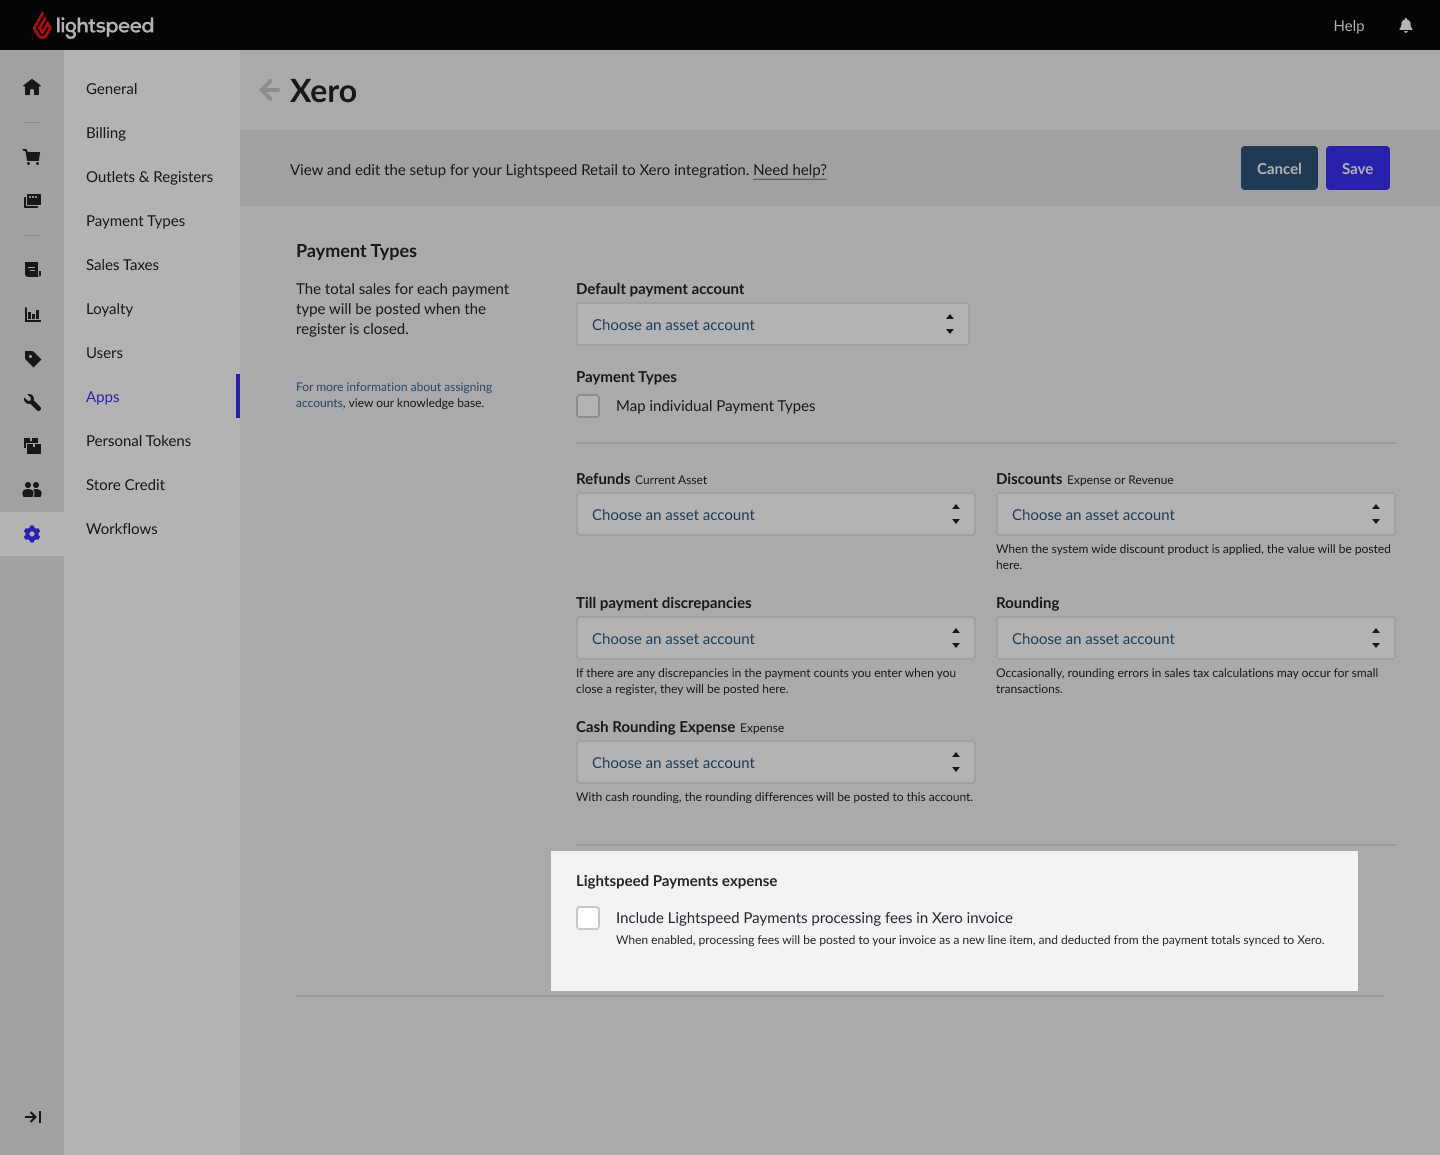 Lightspeed Payments expense checkbox